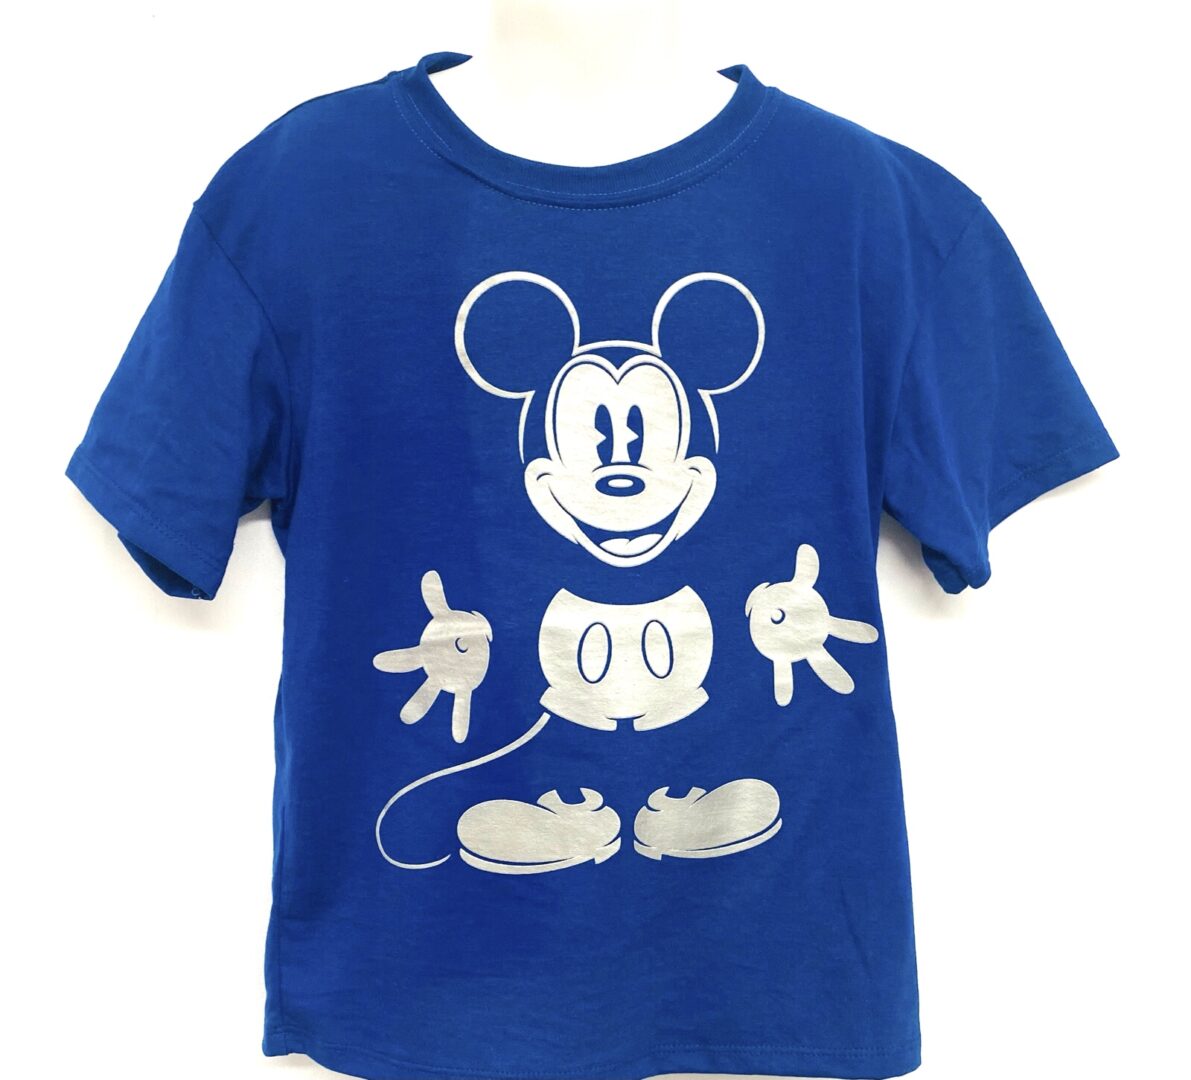 A mickey mouse dark blue graphic shirt